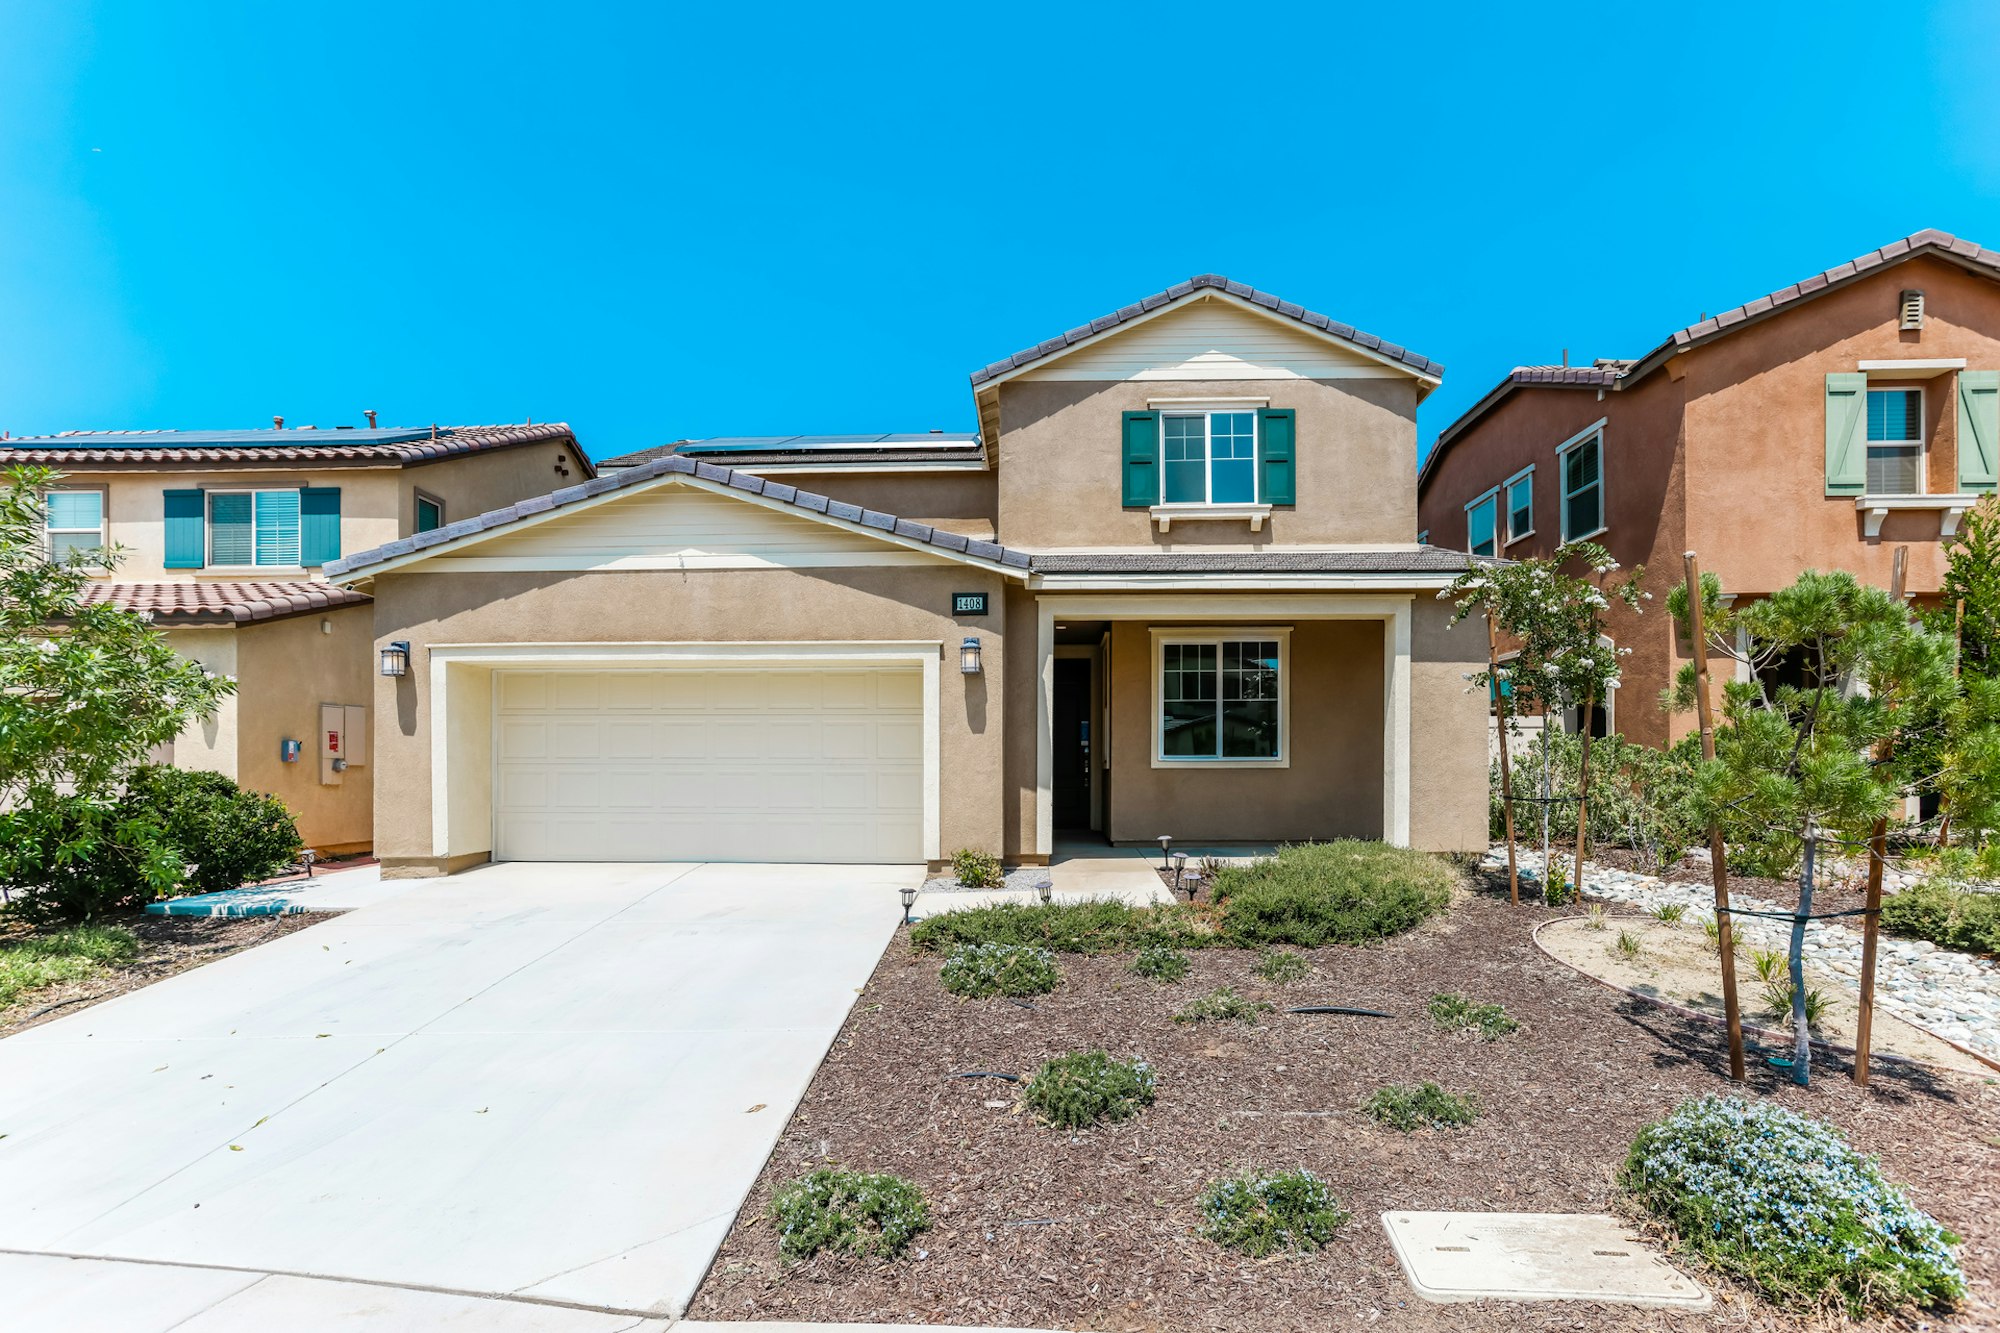 Photo 1 of 27 - 1408 Marble Way, Beaumont, CA 92223